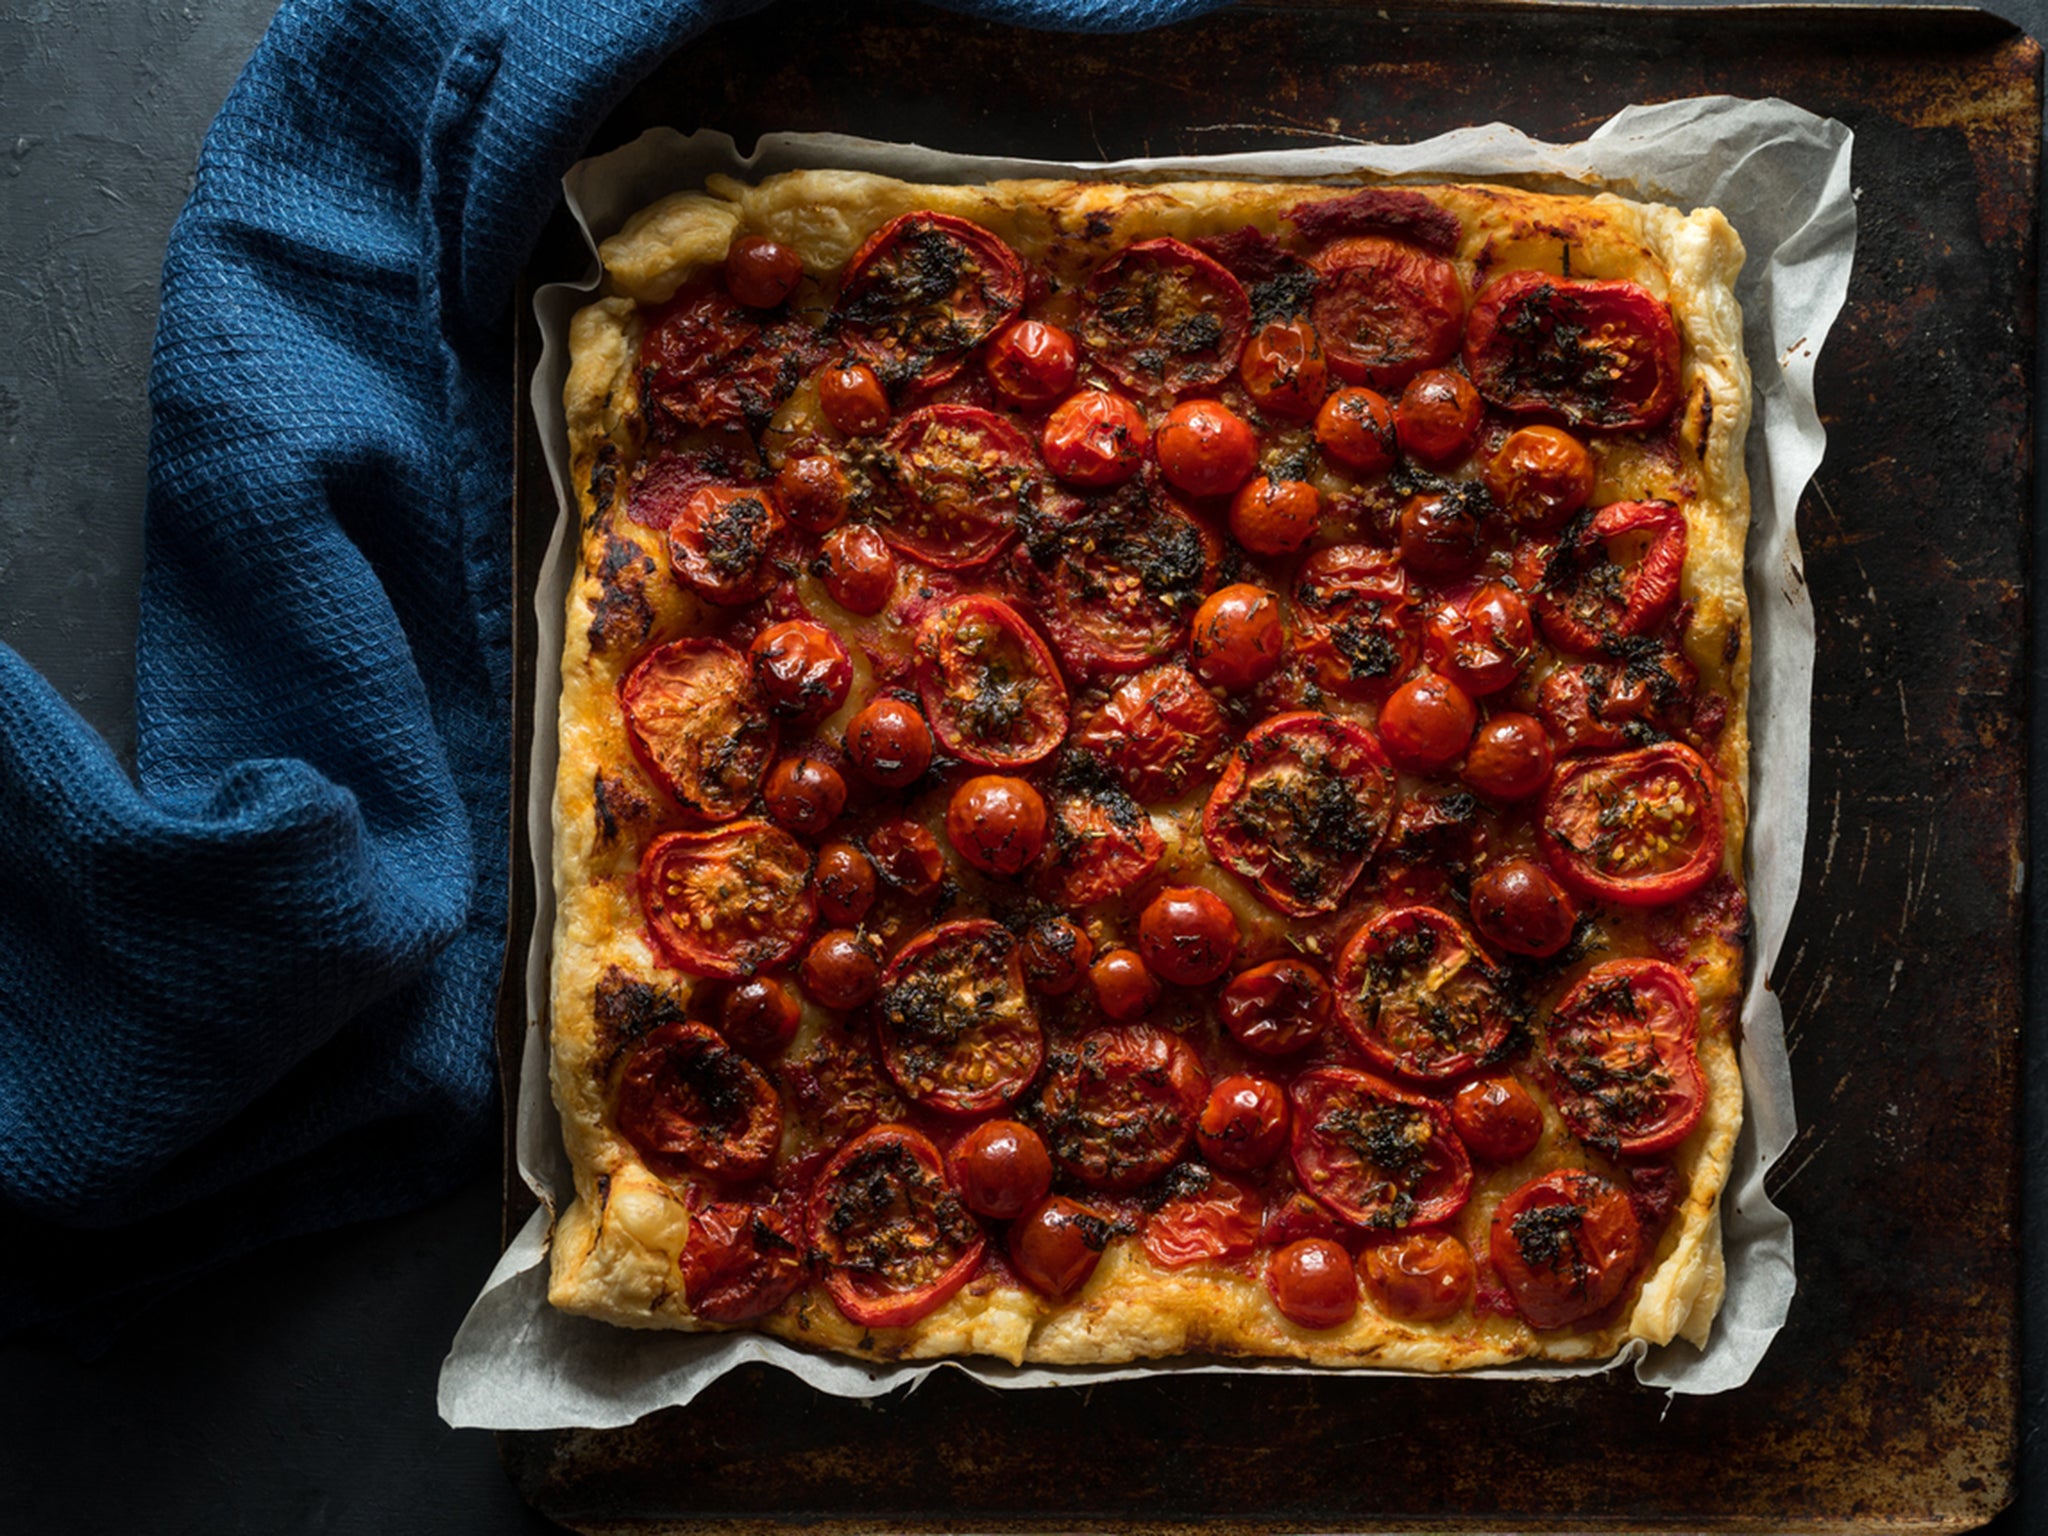 Make the most of tomato season with this cheesy tart recipe